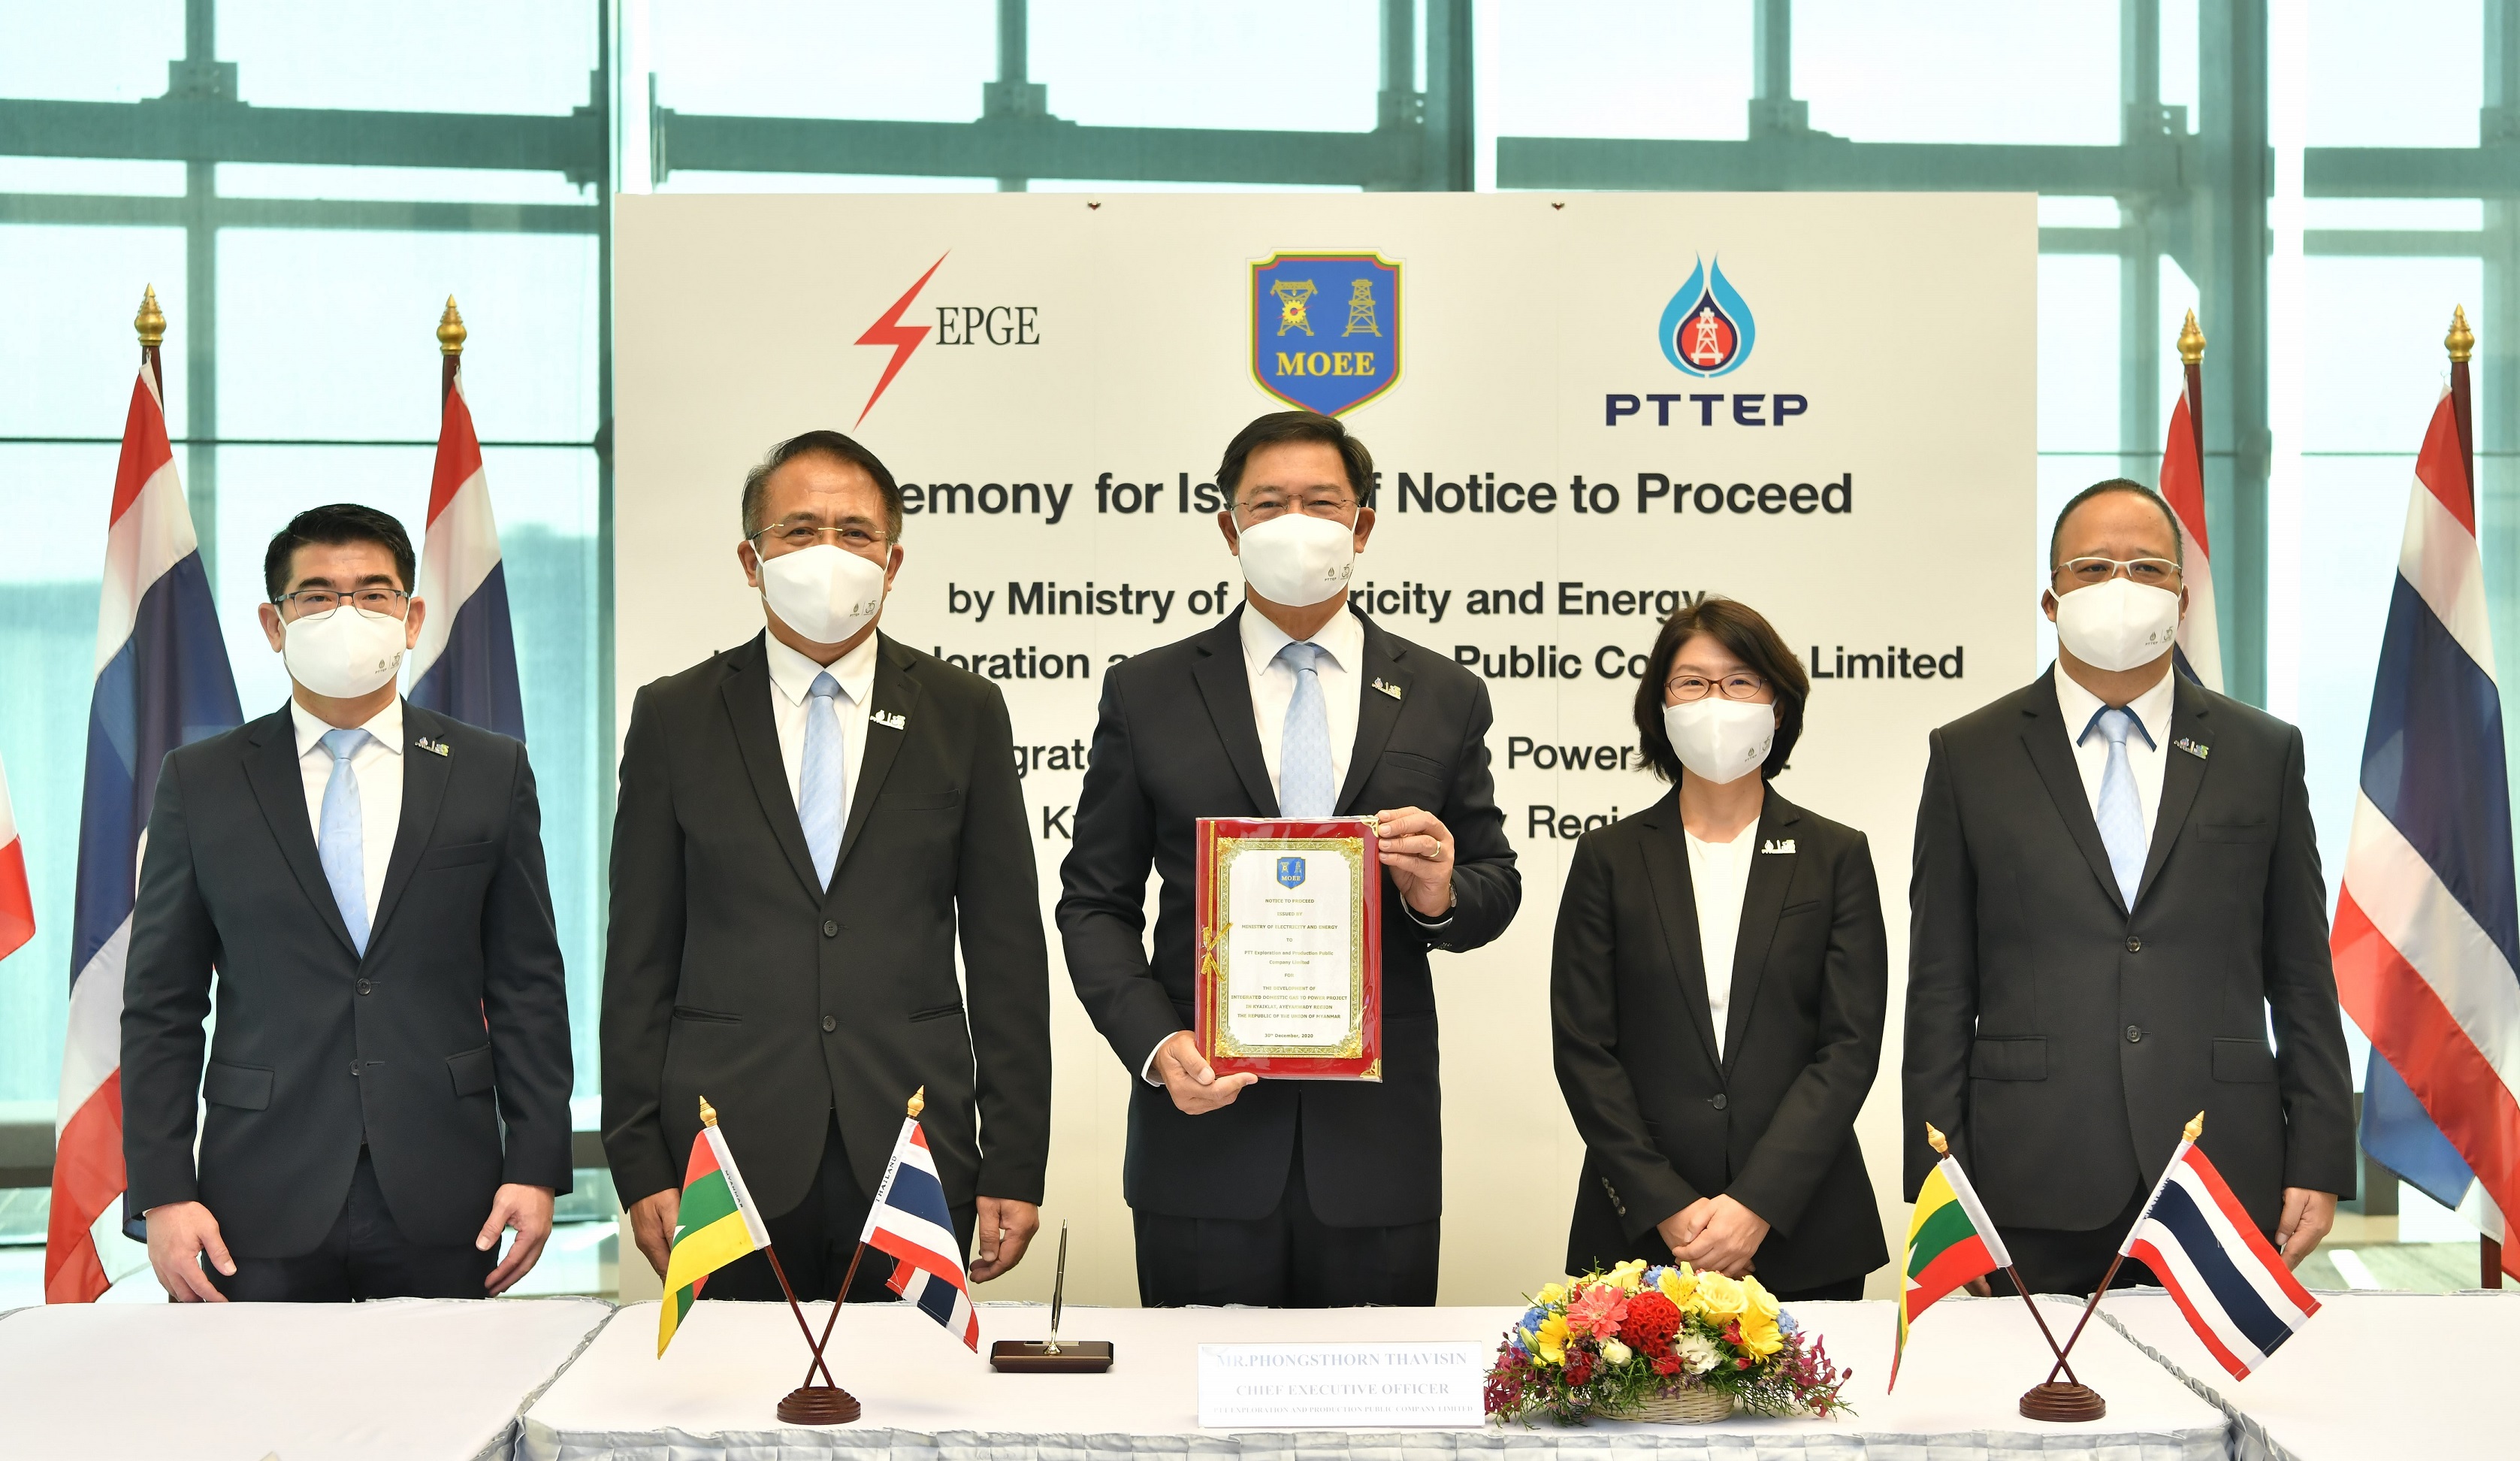 PTTEP Receives an Exclusive Right to Develop the Integrated Domestic Gas to Power Project in Myanmar